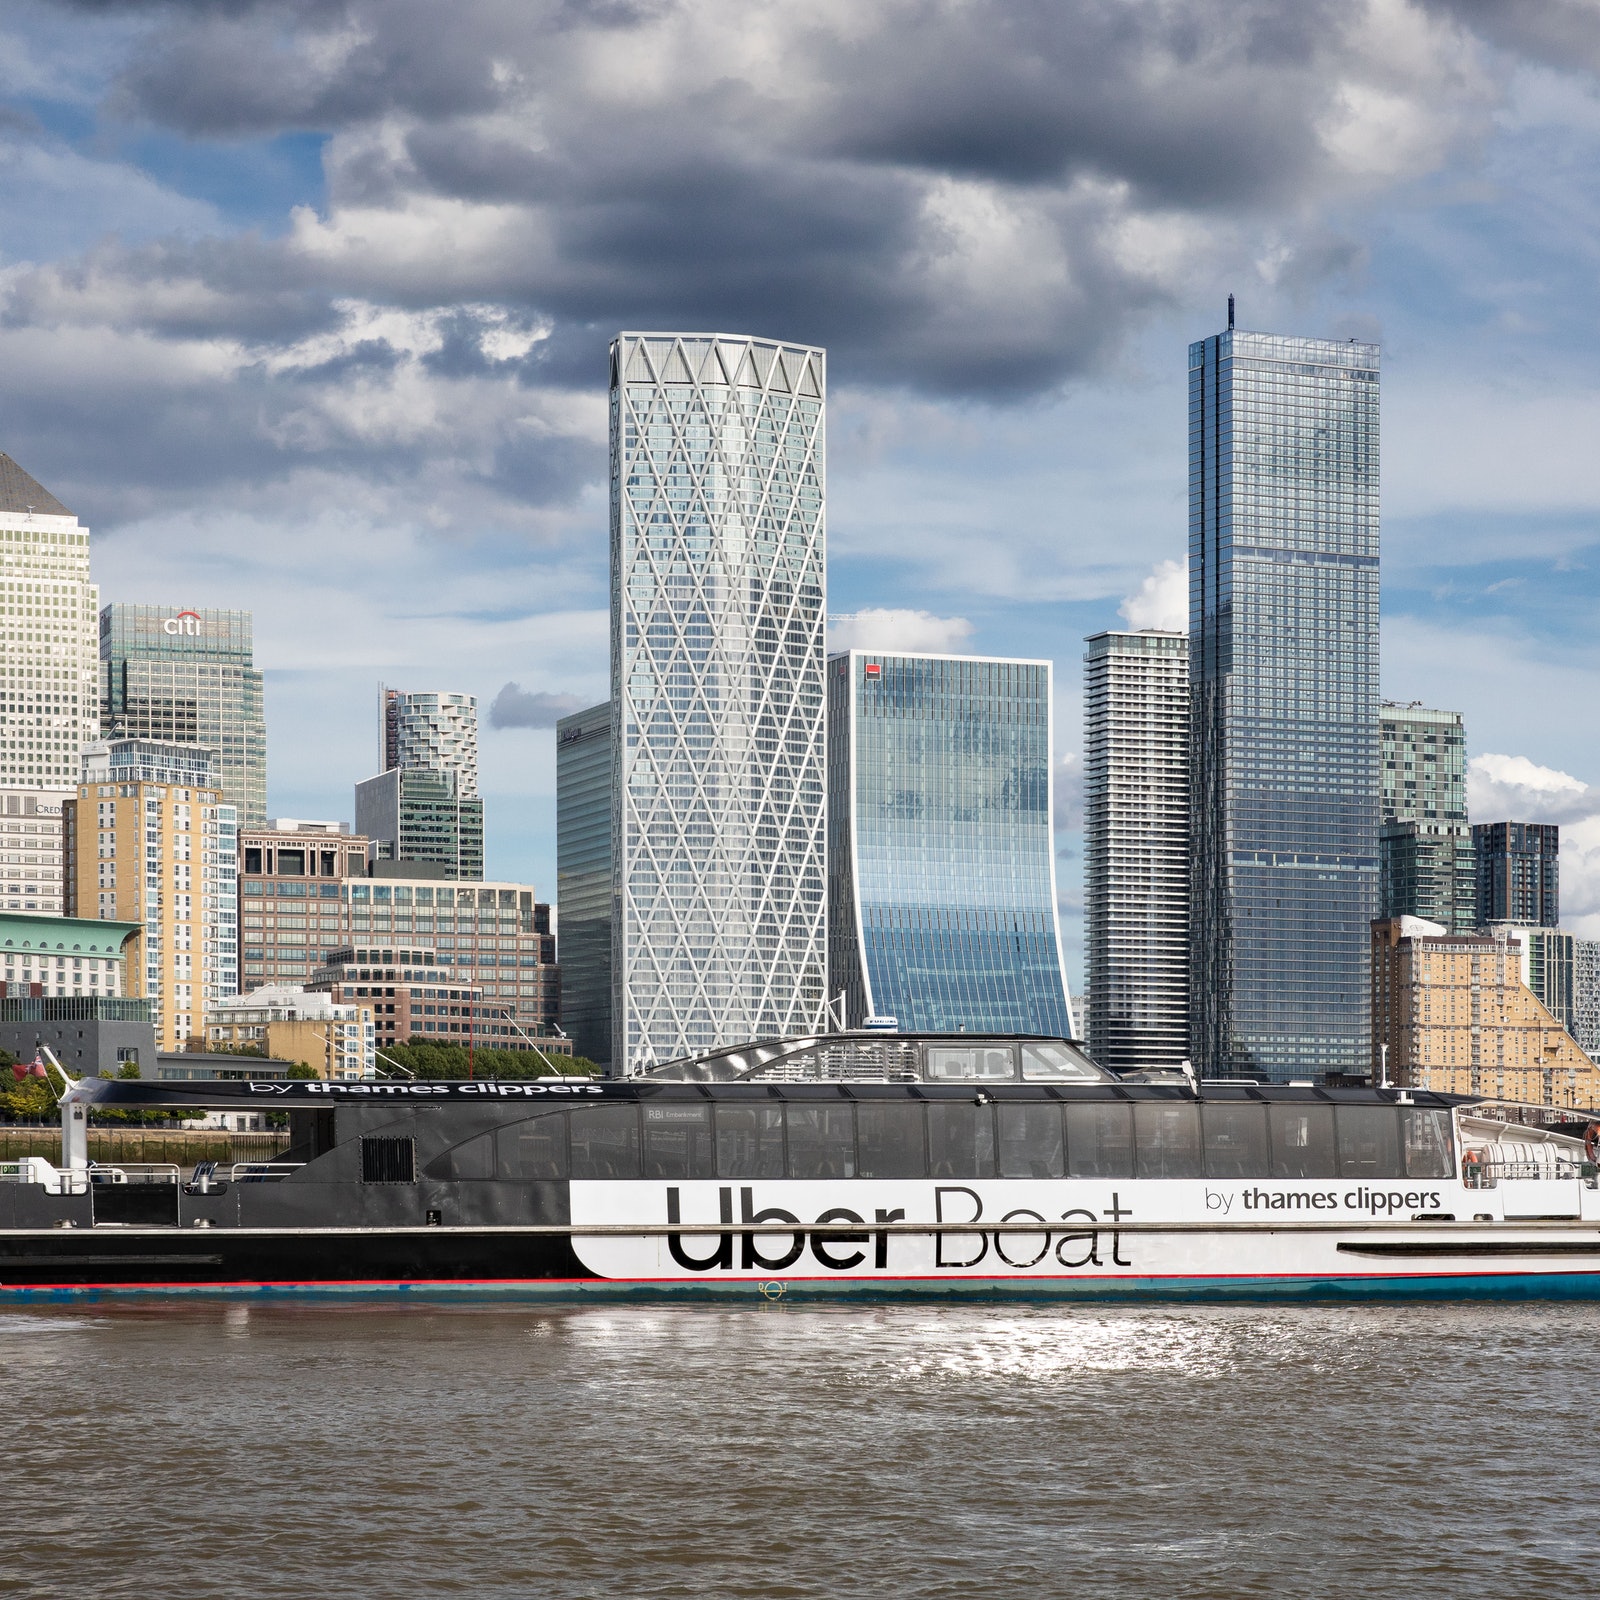 Single Uber Boat by Thames Clippers journey and Emirates Air Line Cable Car in United Kingdom